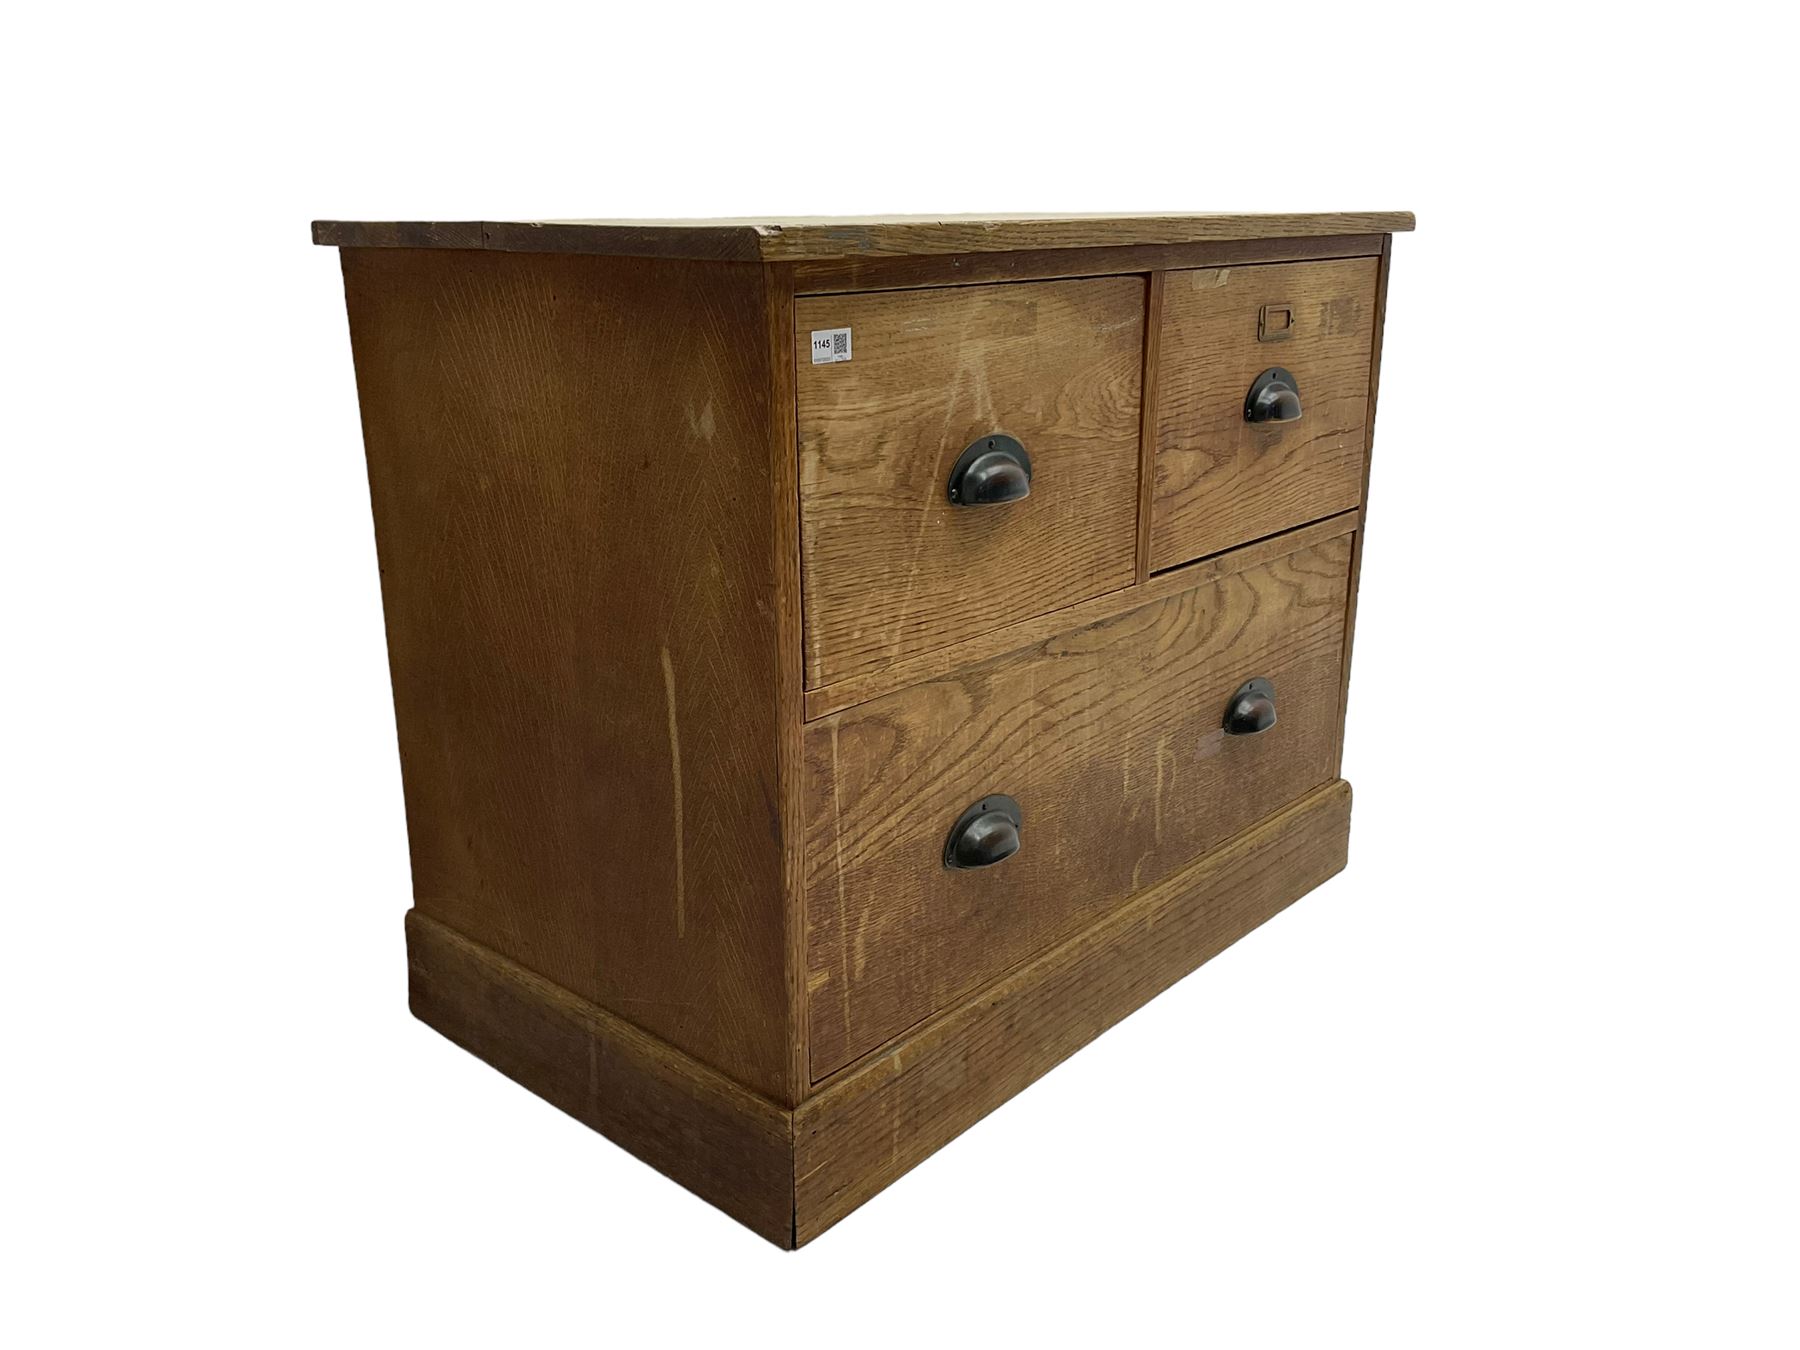 Early to mid-20th century oak chest - Image 5 of 6